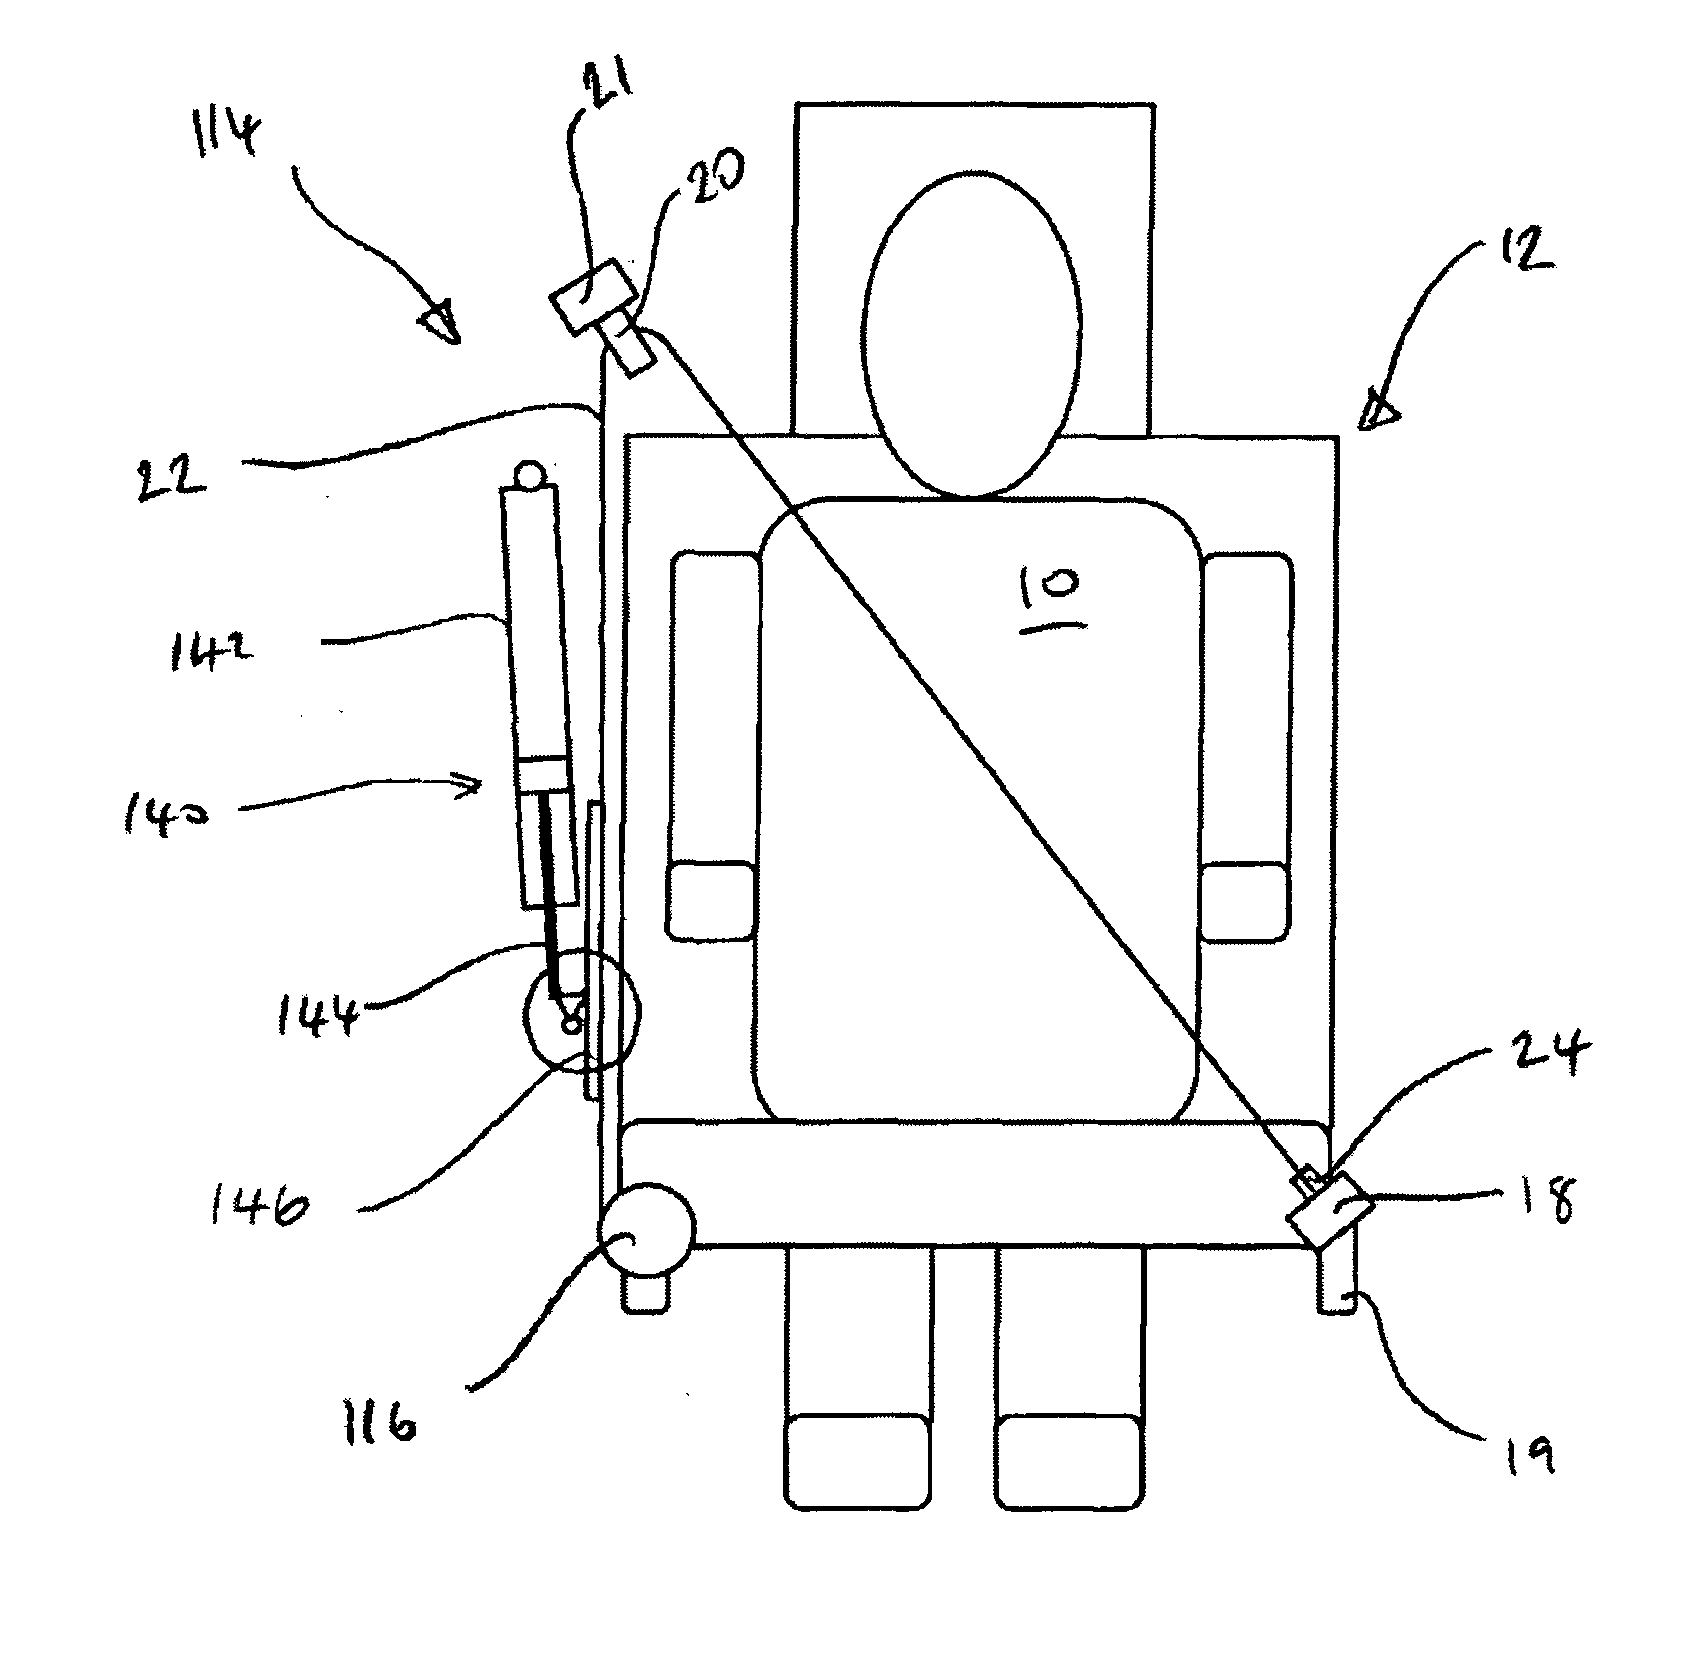 Restraint system for a seat belt device